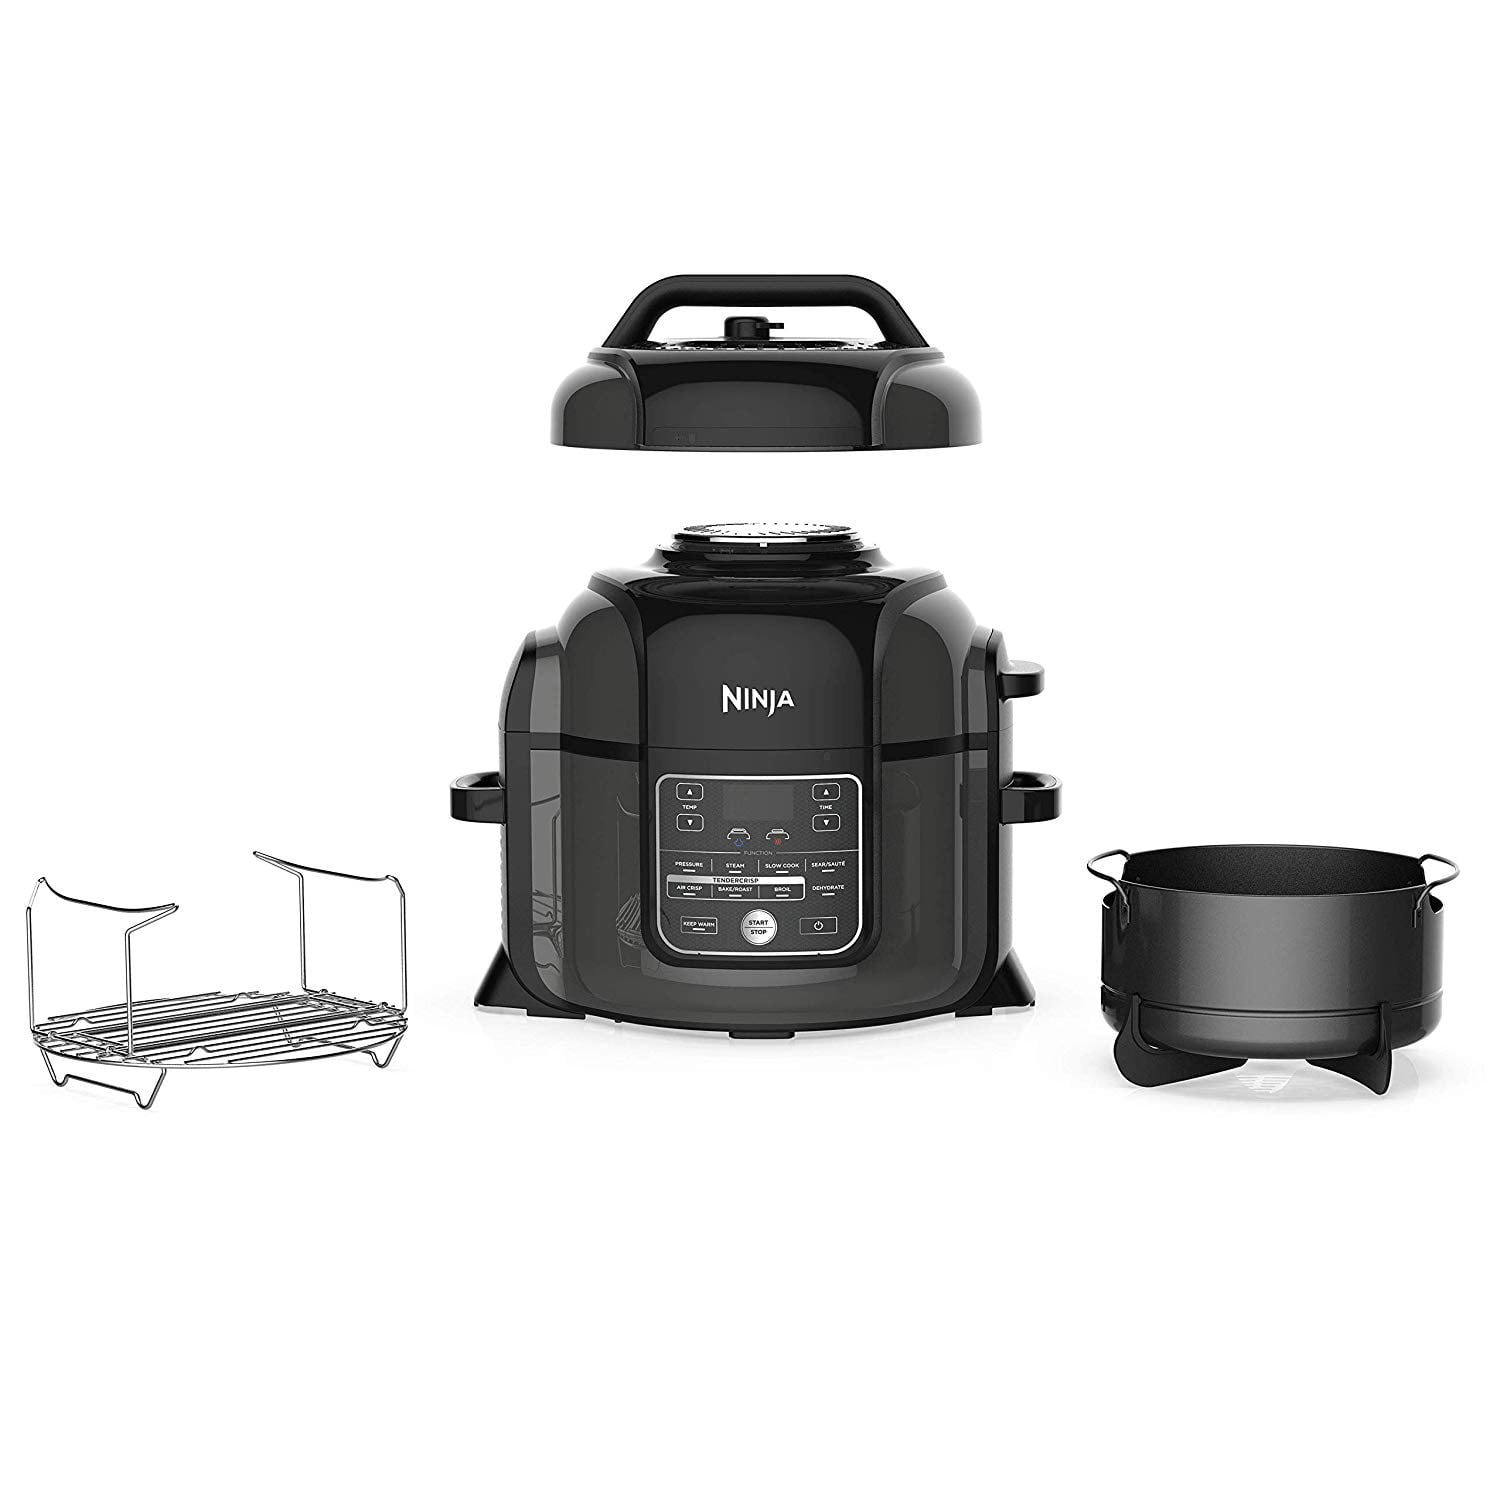 Ninja Cooking pot all in one air fryer/pressure cooker ext.- excellent -  appliances - by owner - sale - craigslist